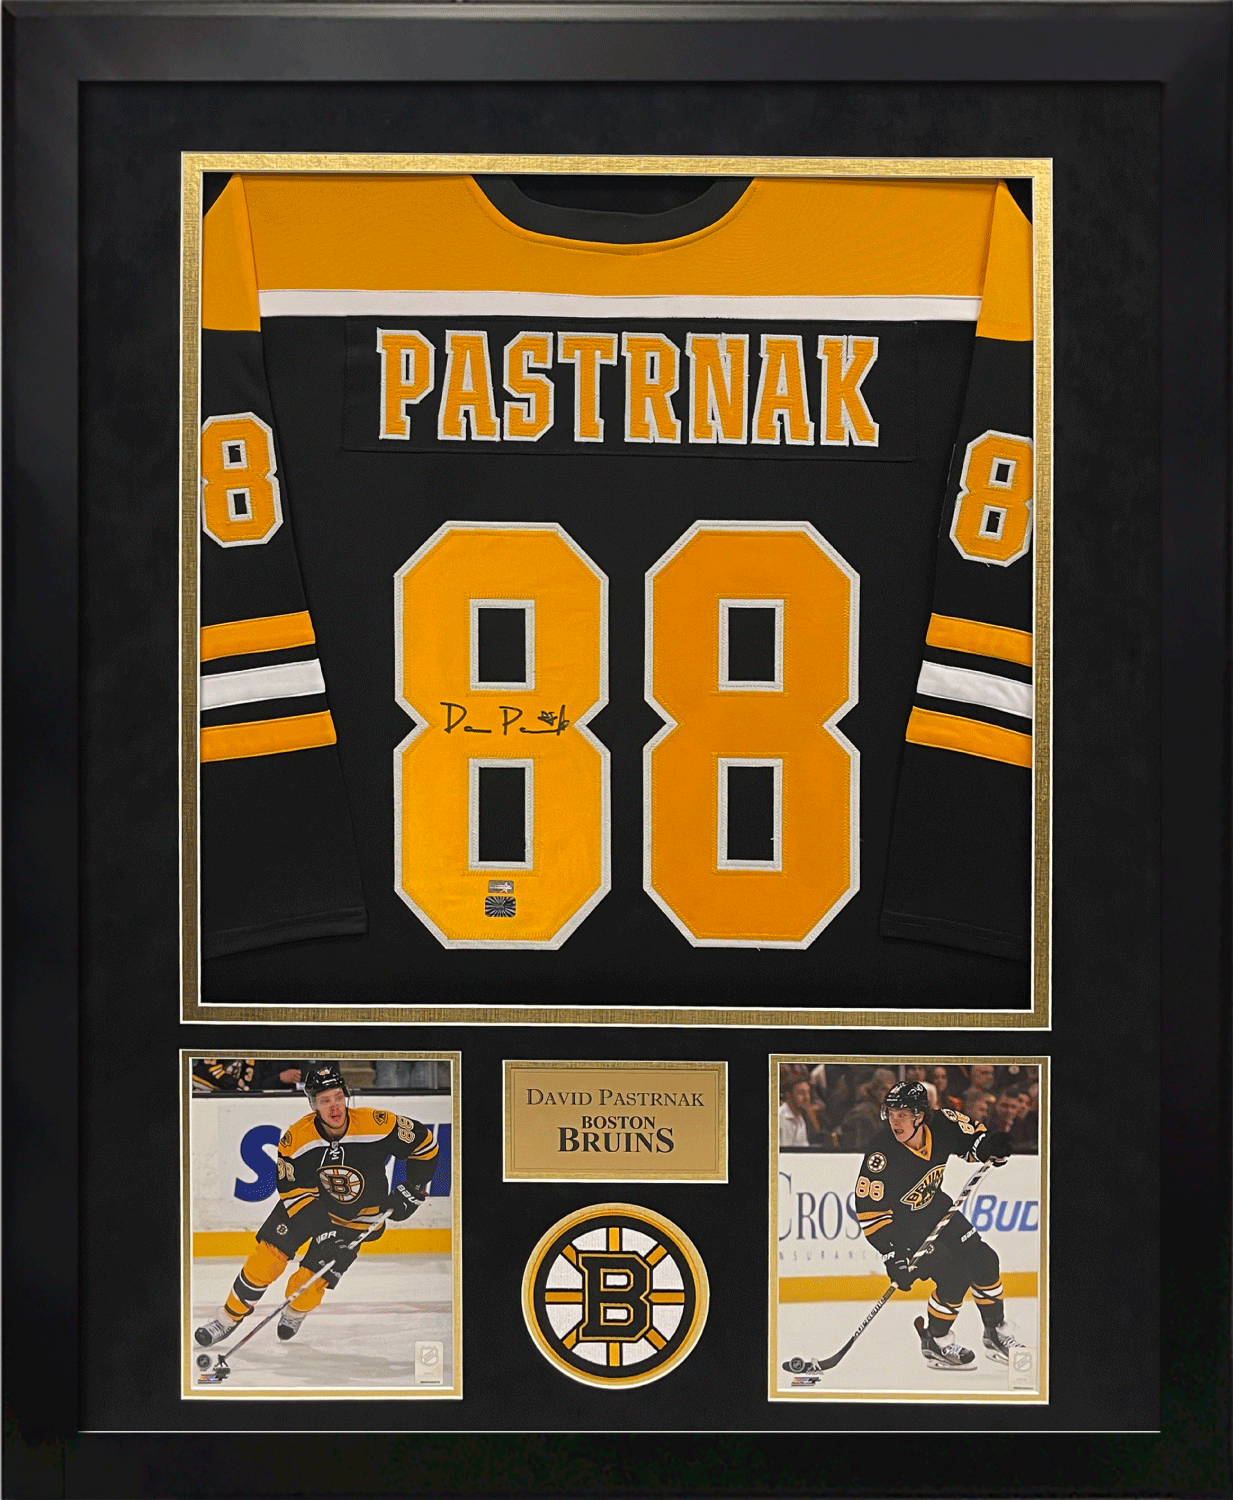 Custom Frame the jersey you provide with photos, team logo patch, and the in house laser plate is created with your favorite stats. New England Picture can frame any local team or teams from across the world. Fill out the custom framing info and email us a picture of the item you want framed. The framing cost for a similar jersey is priced between $350-$450 depending on the details.